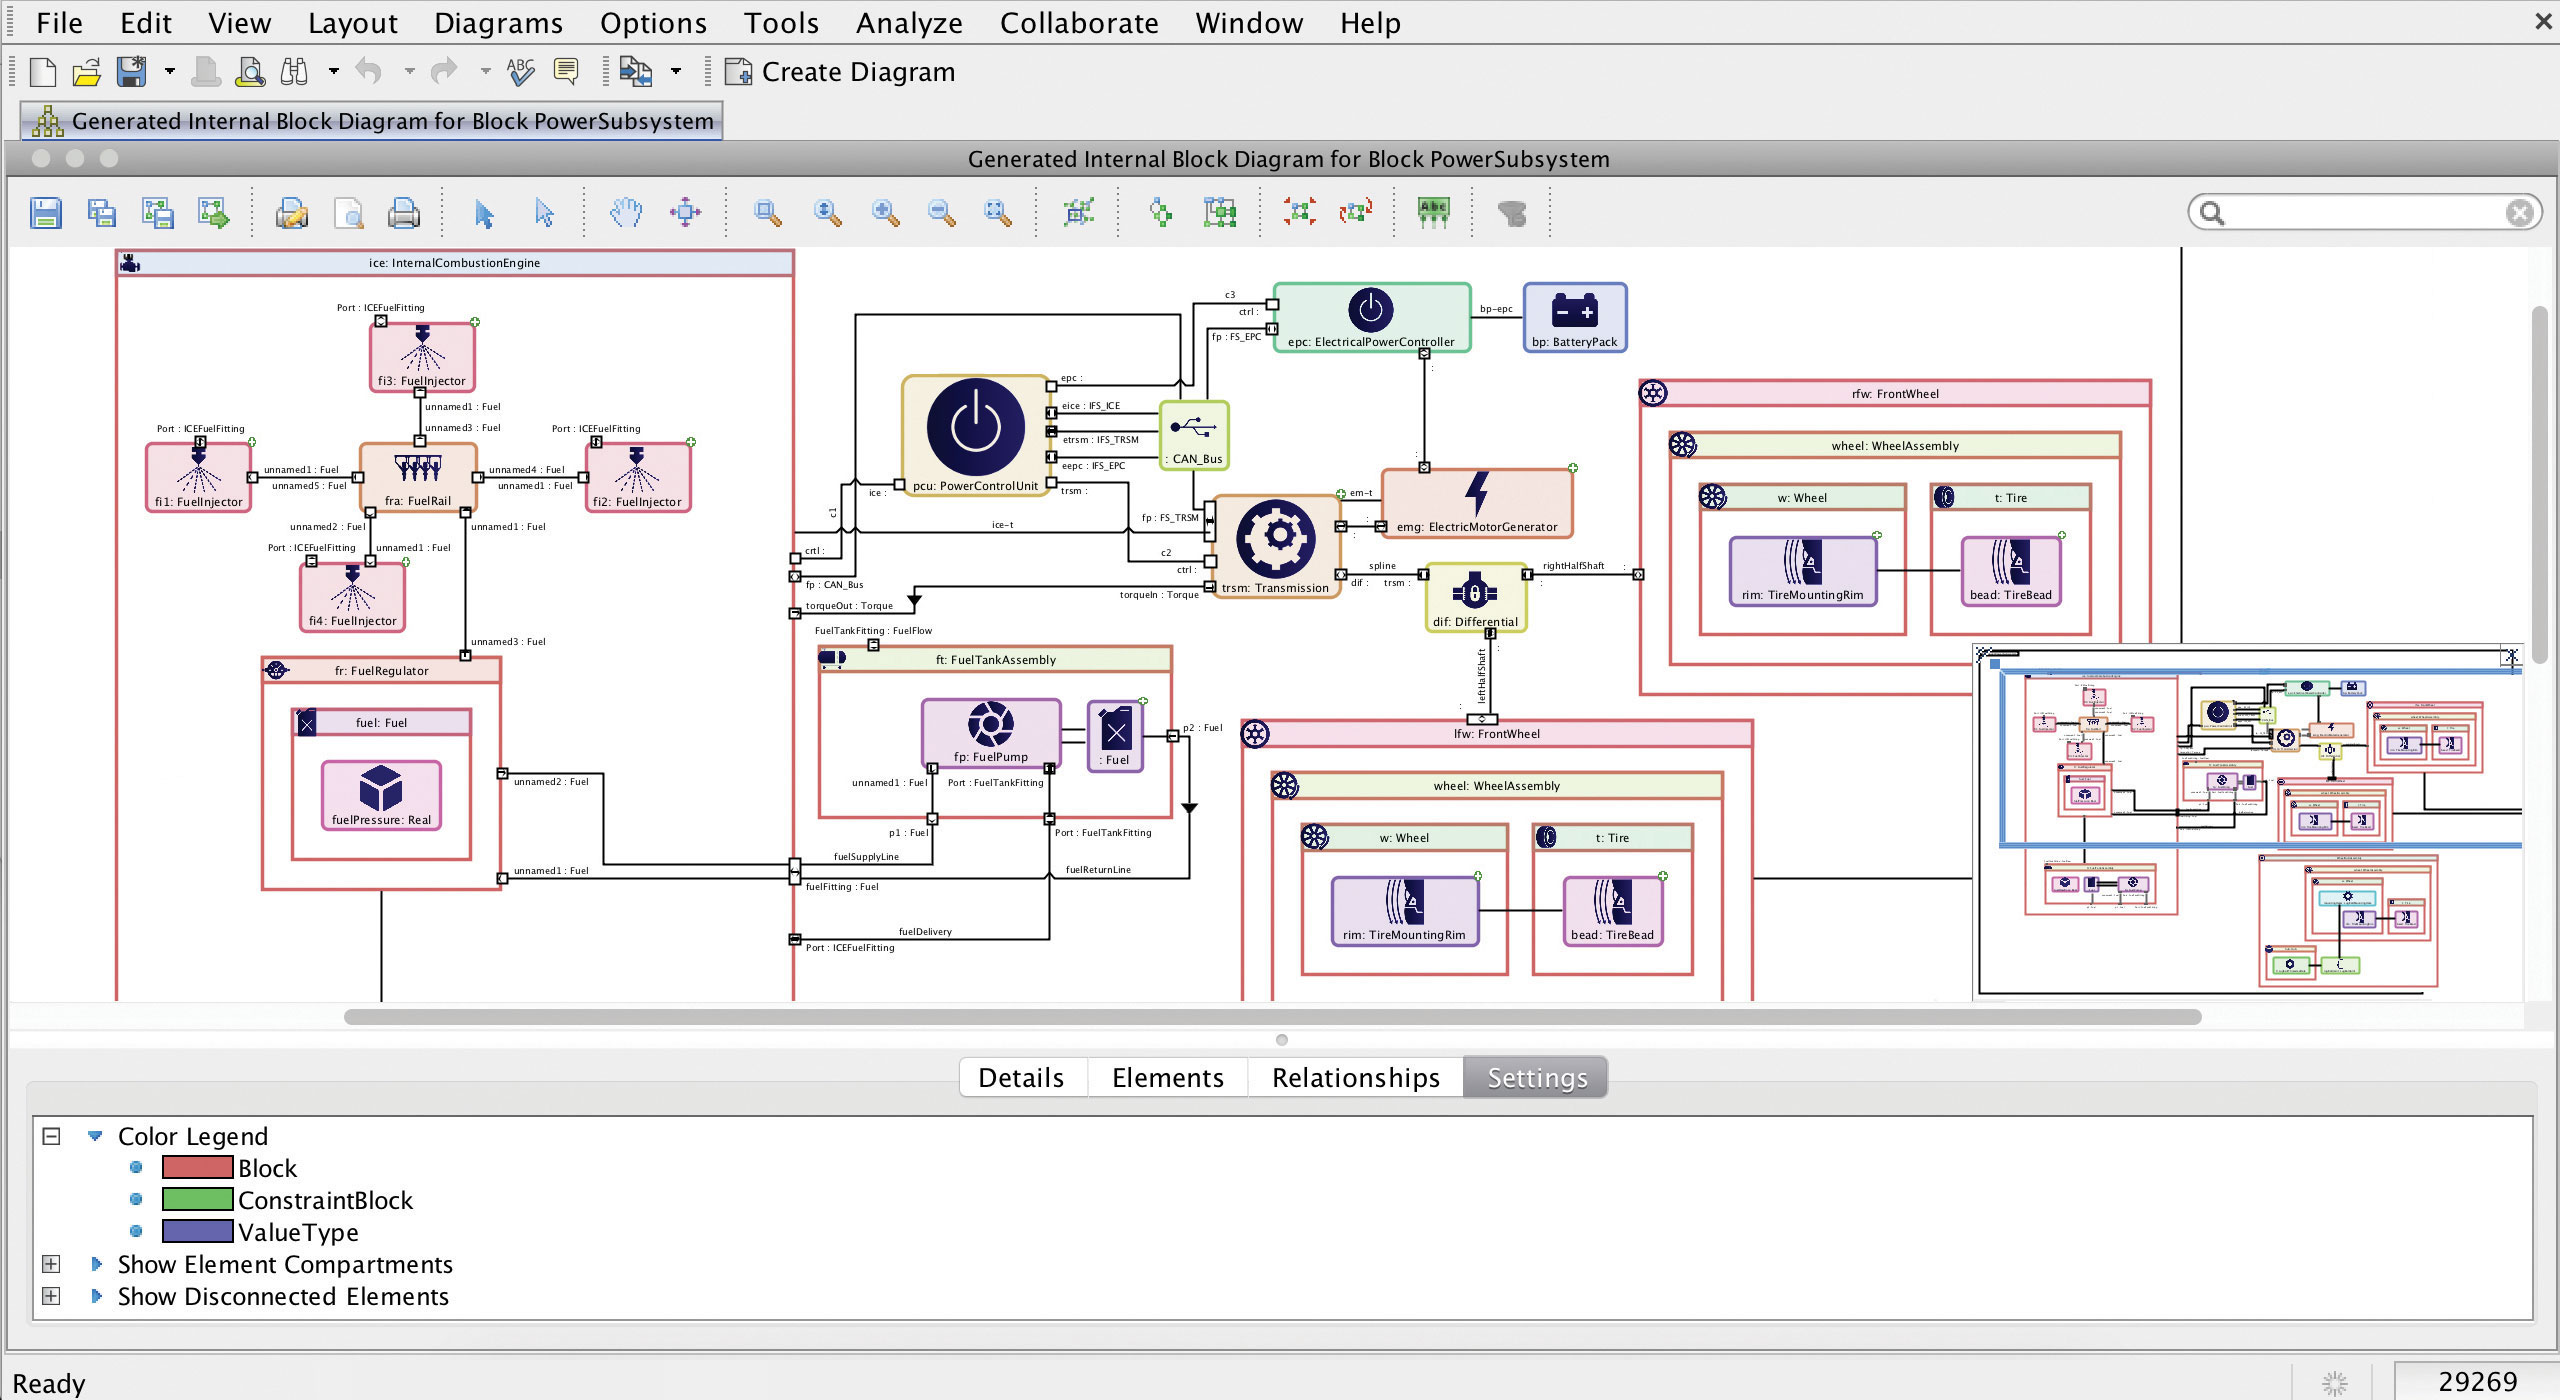 Model-Based Engineering automatically loads MagicDraw and Teamwork Cloud models and adds new nested connectors for complex system models